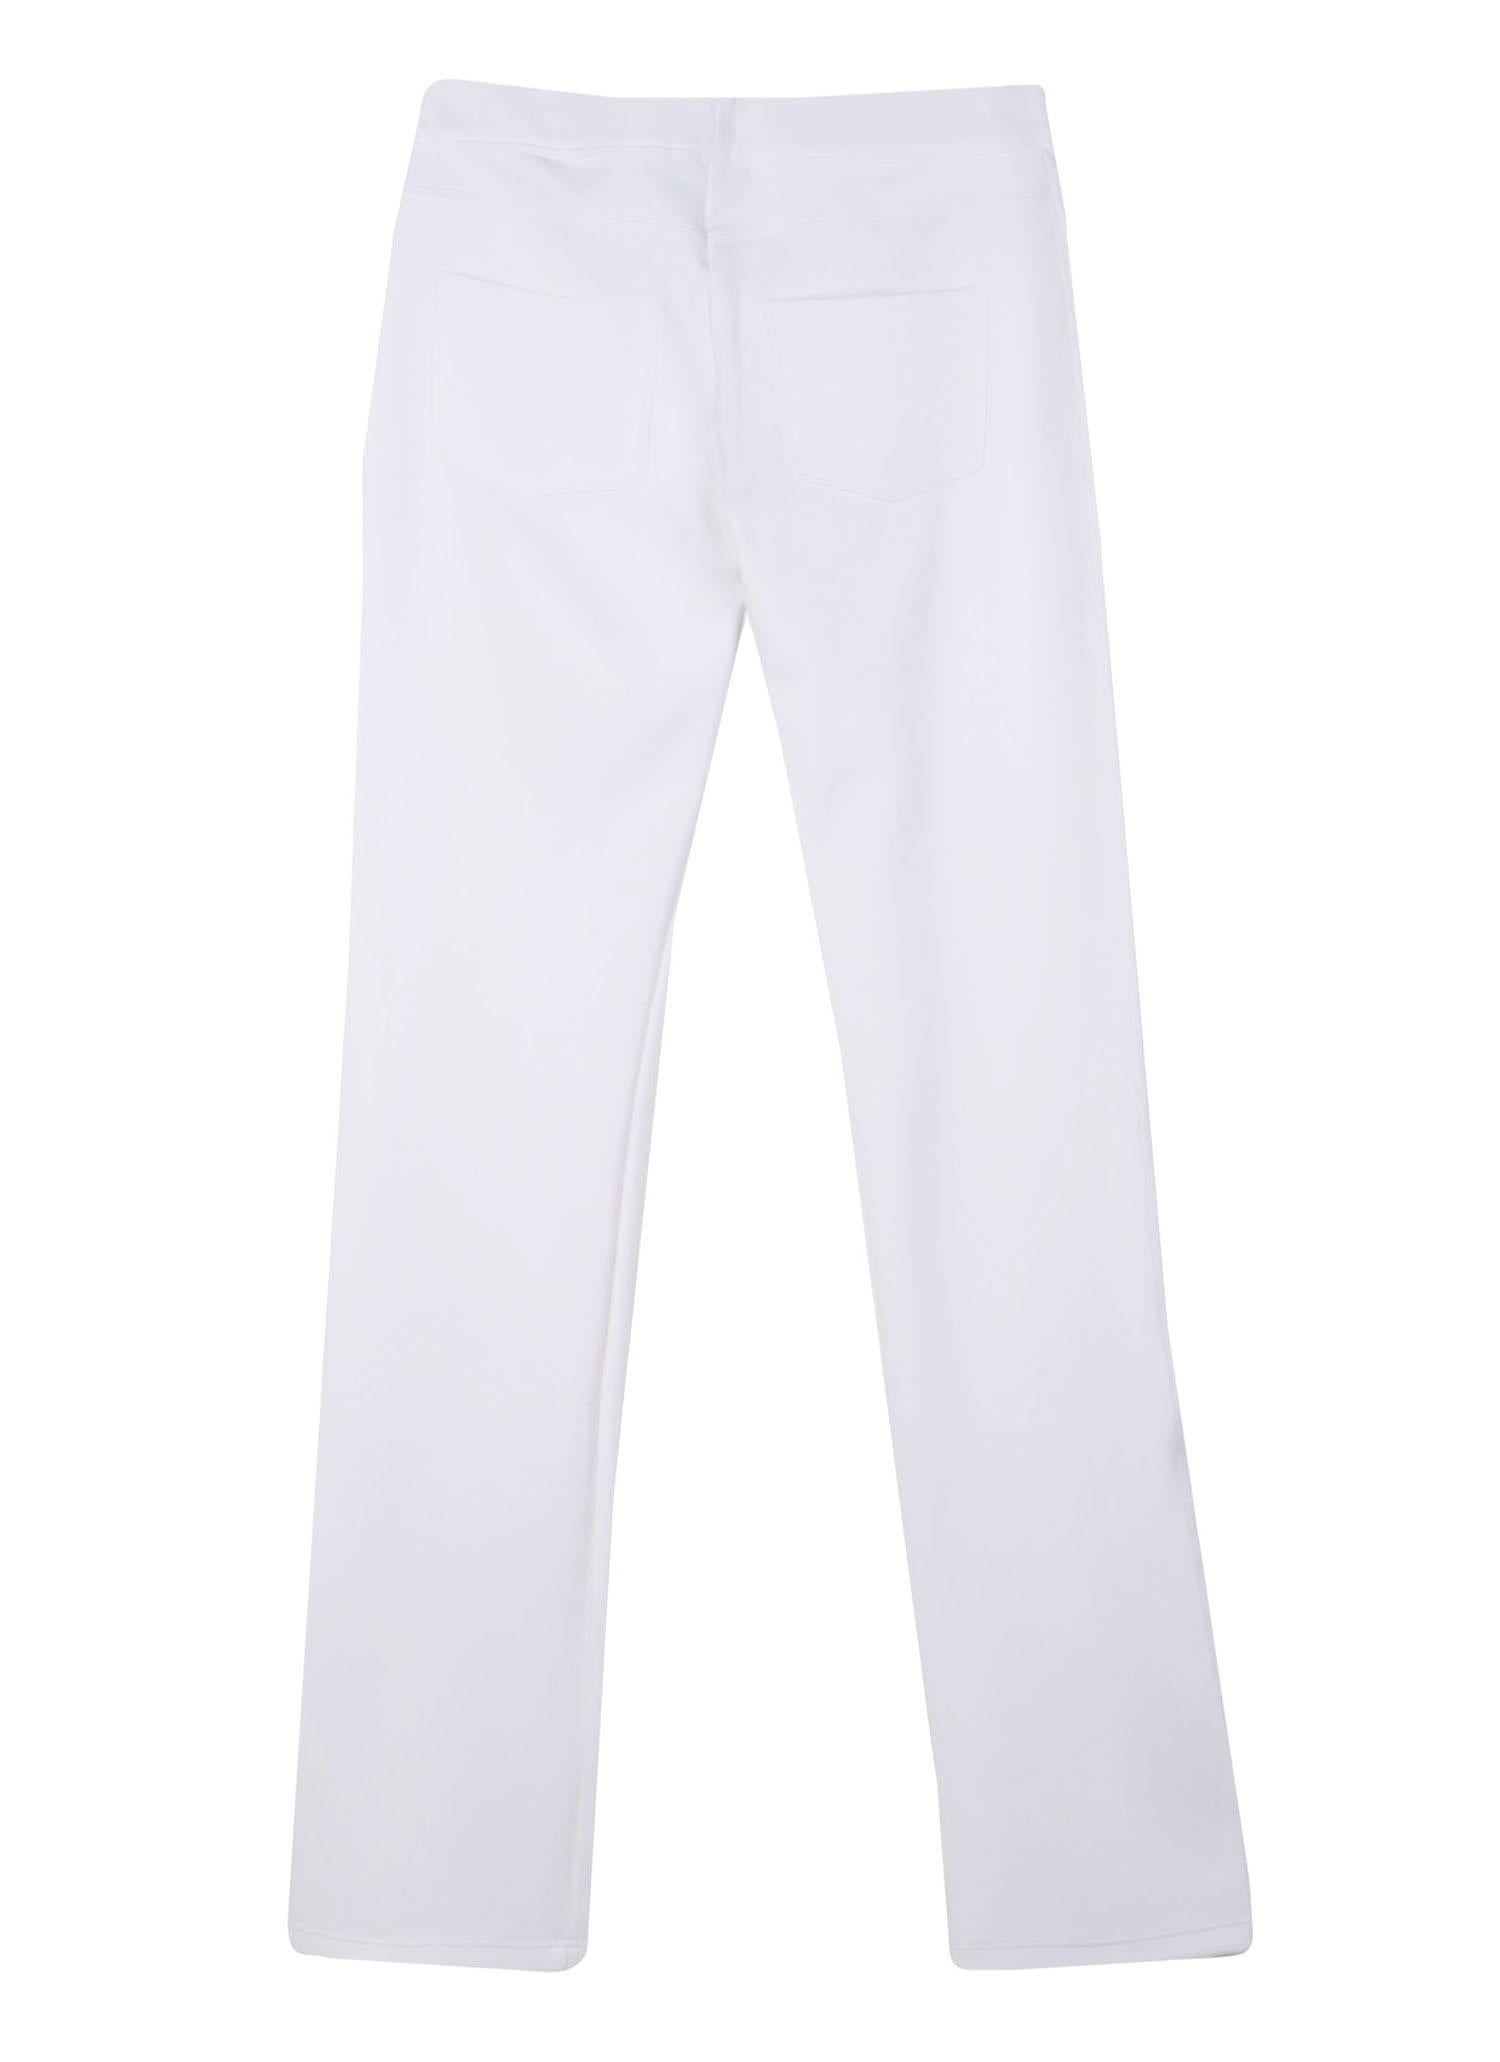 New Versace Women's White Gym Pant Suit with Crystal Embellishment  US 6 and 8 For Sale 3